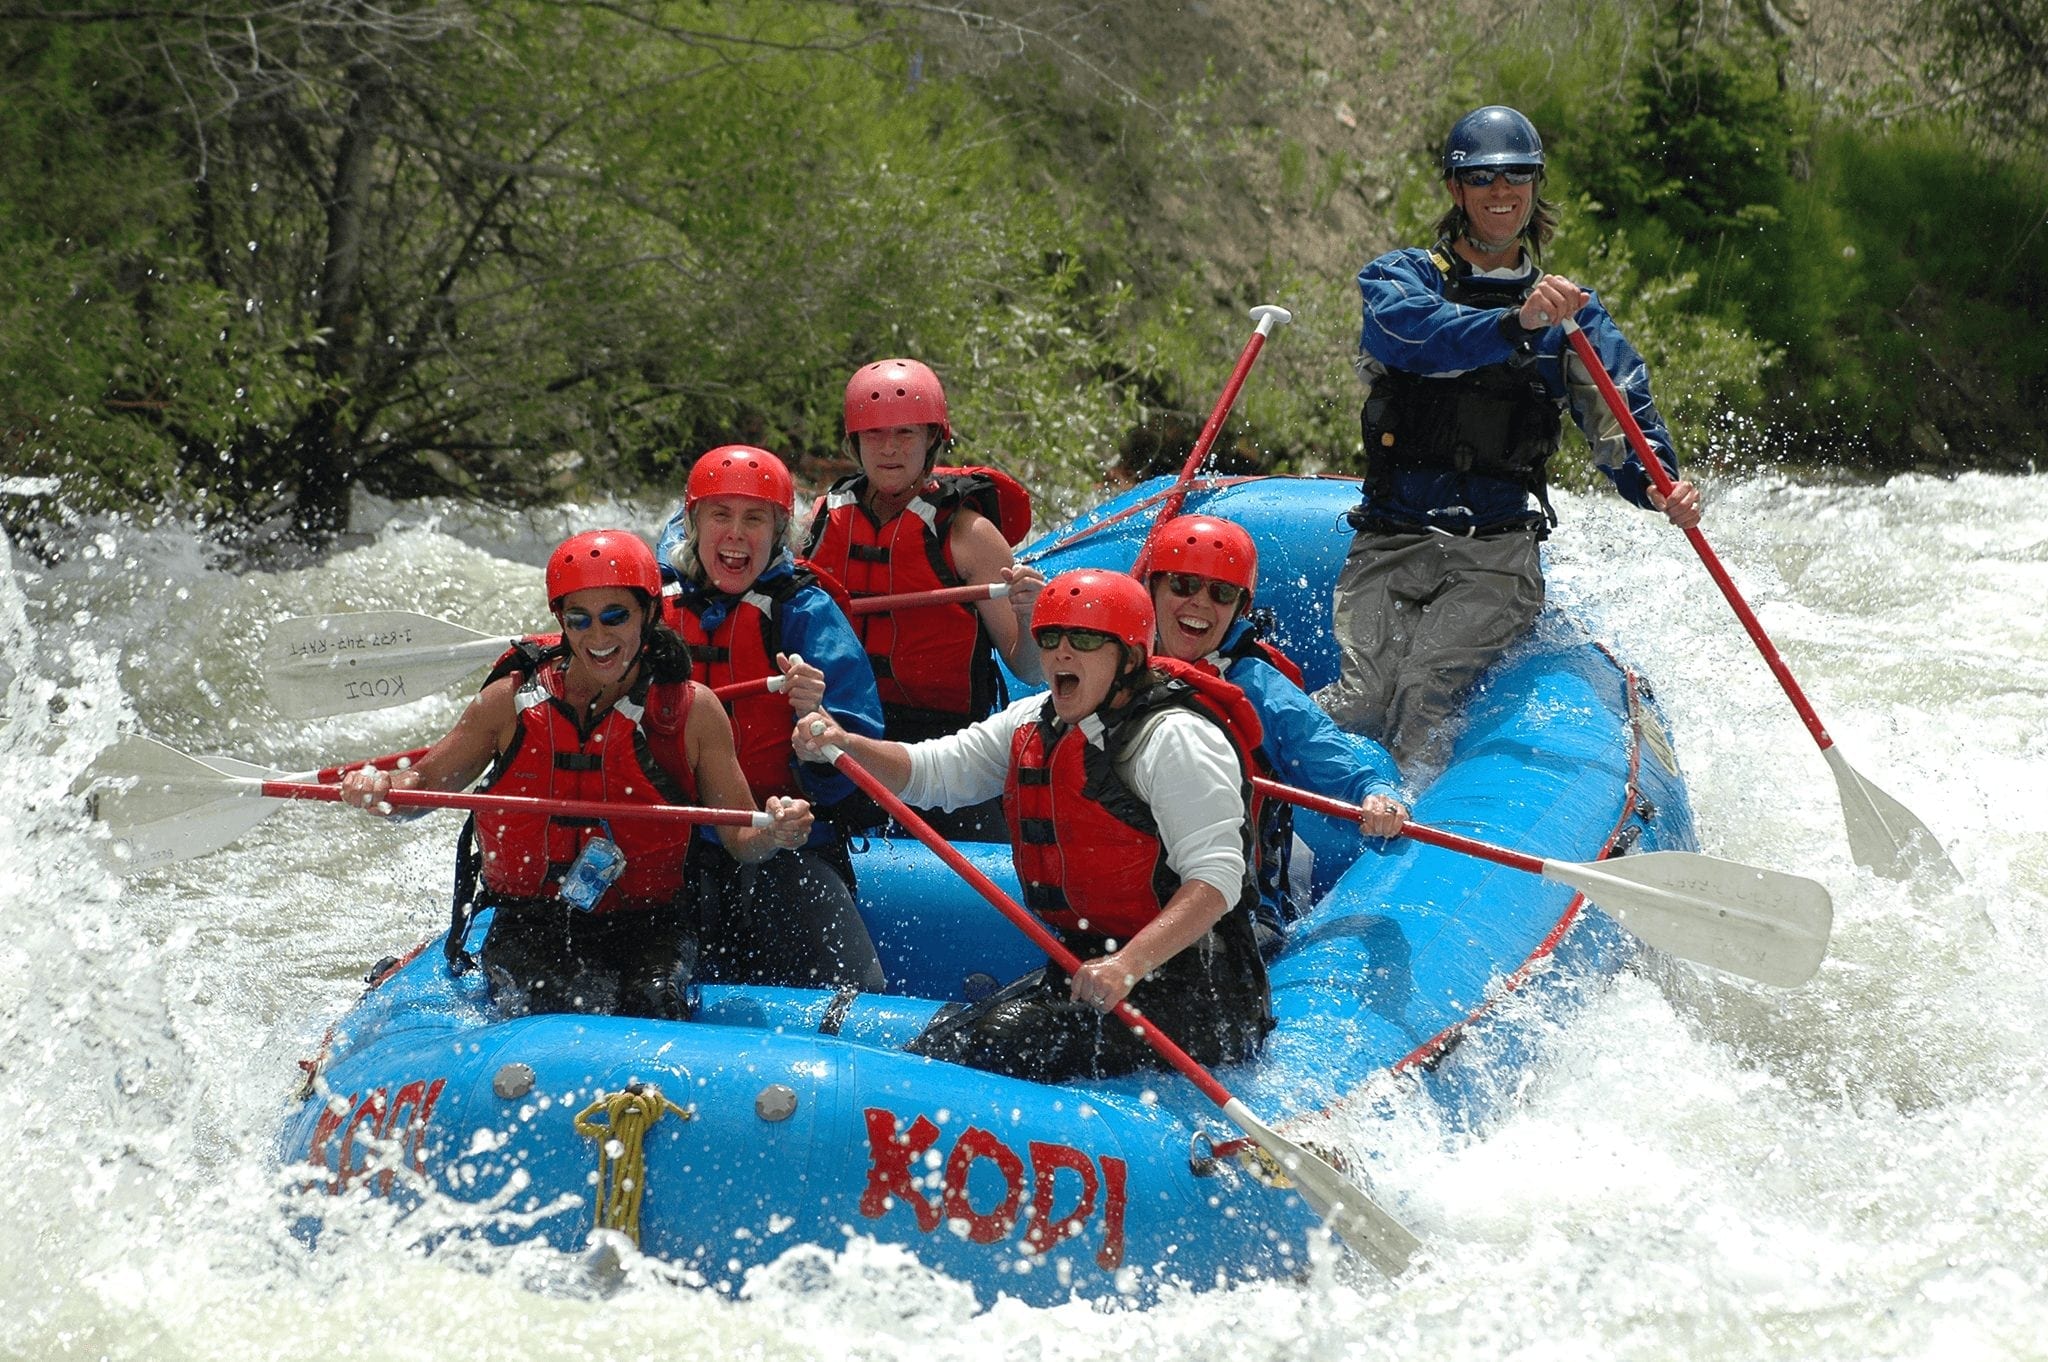 A group river rafting during a Breckenridge summer